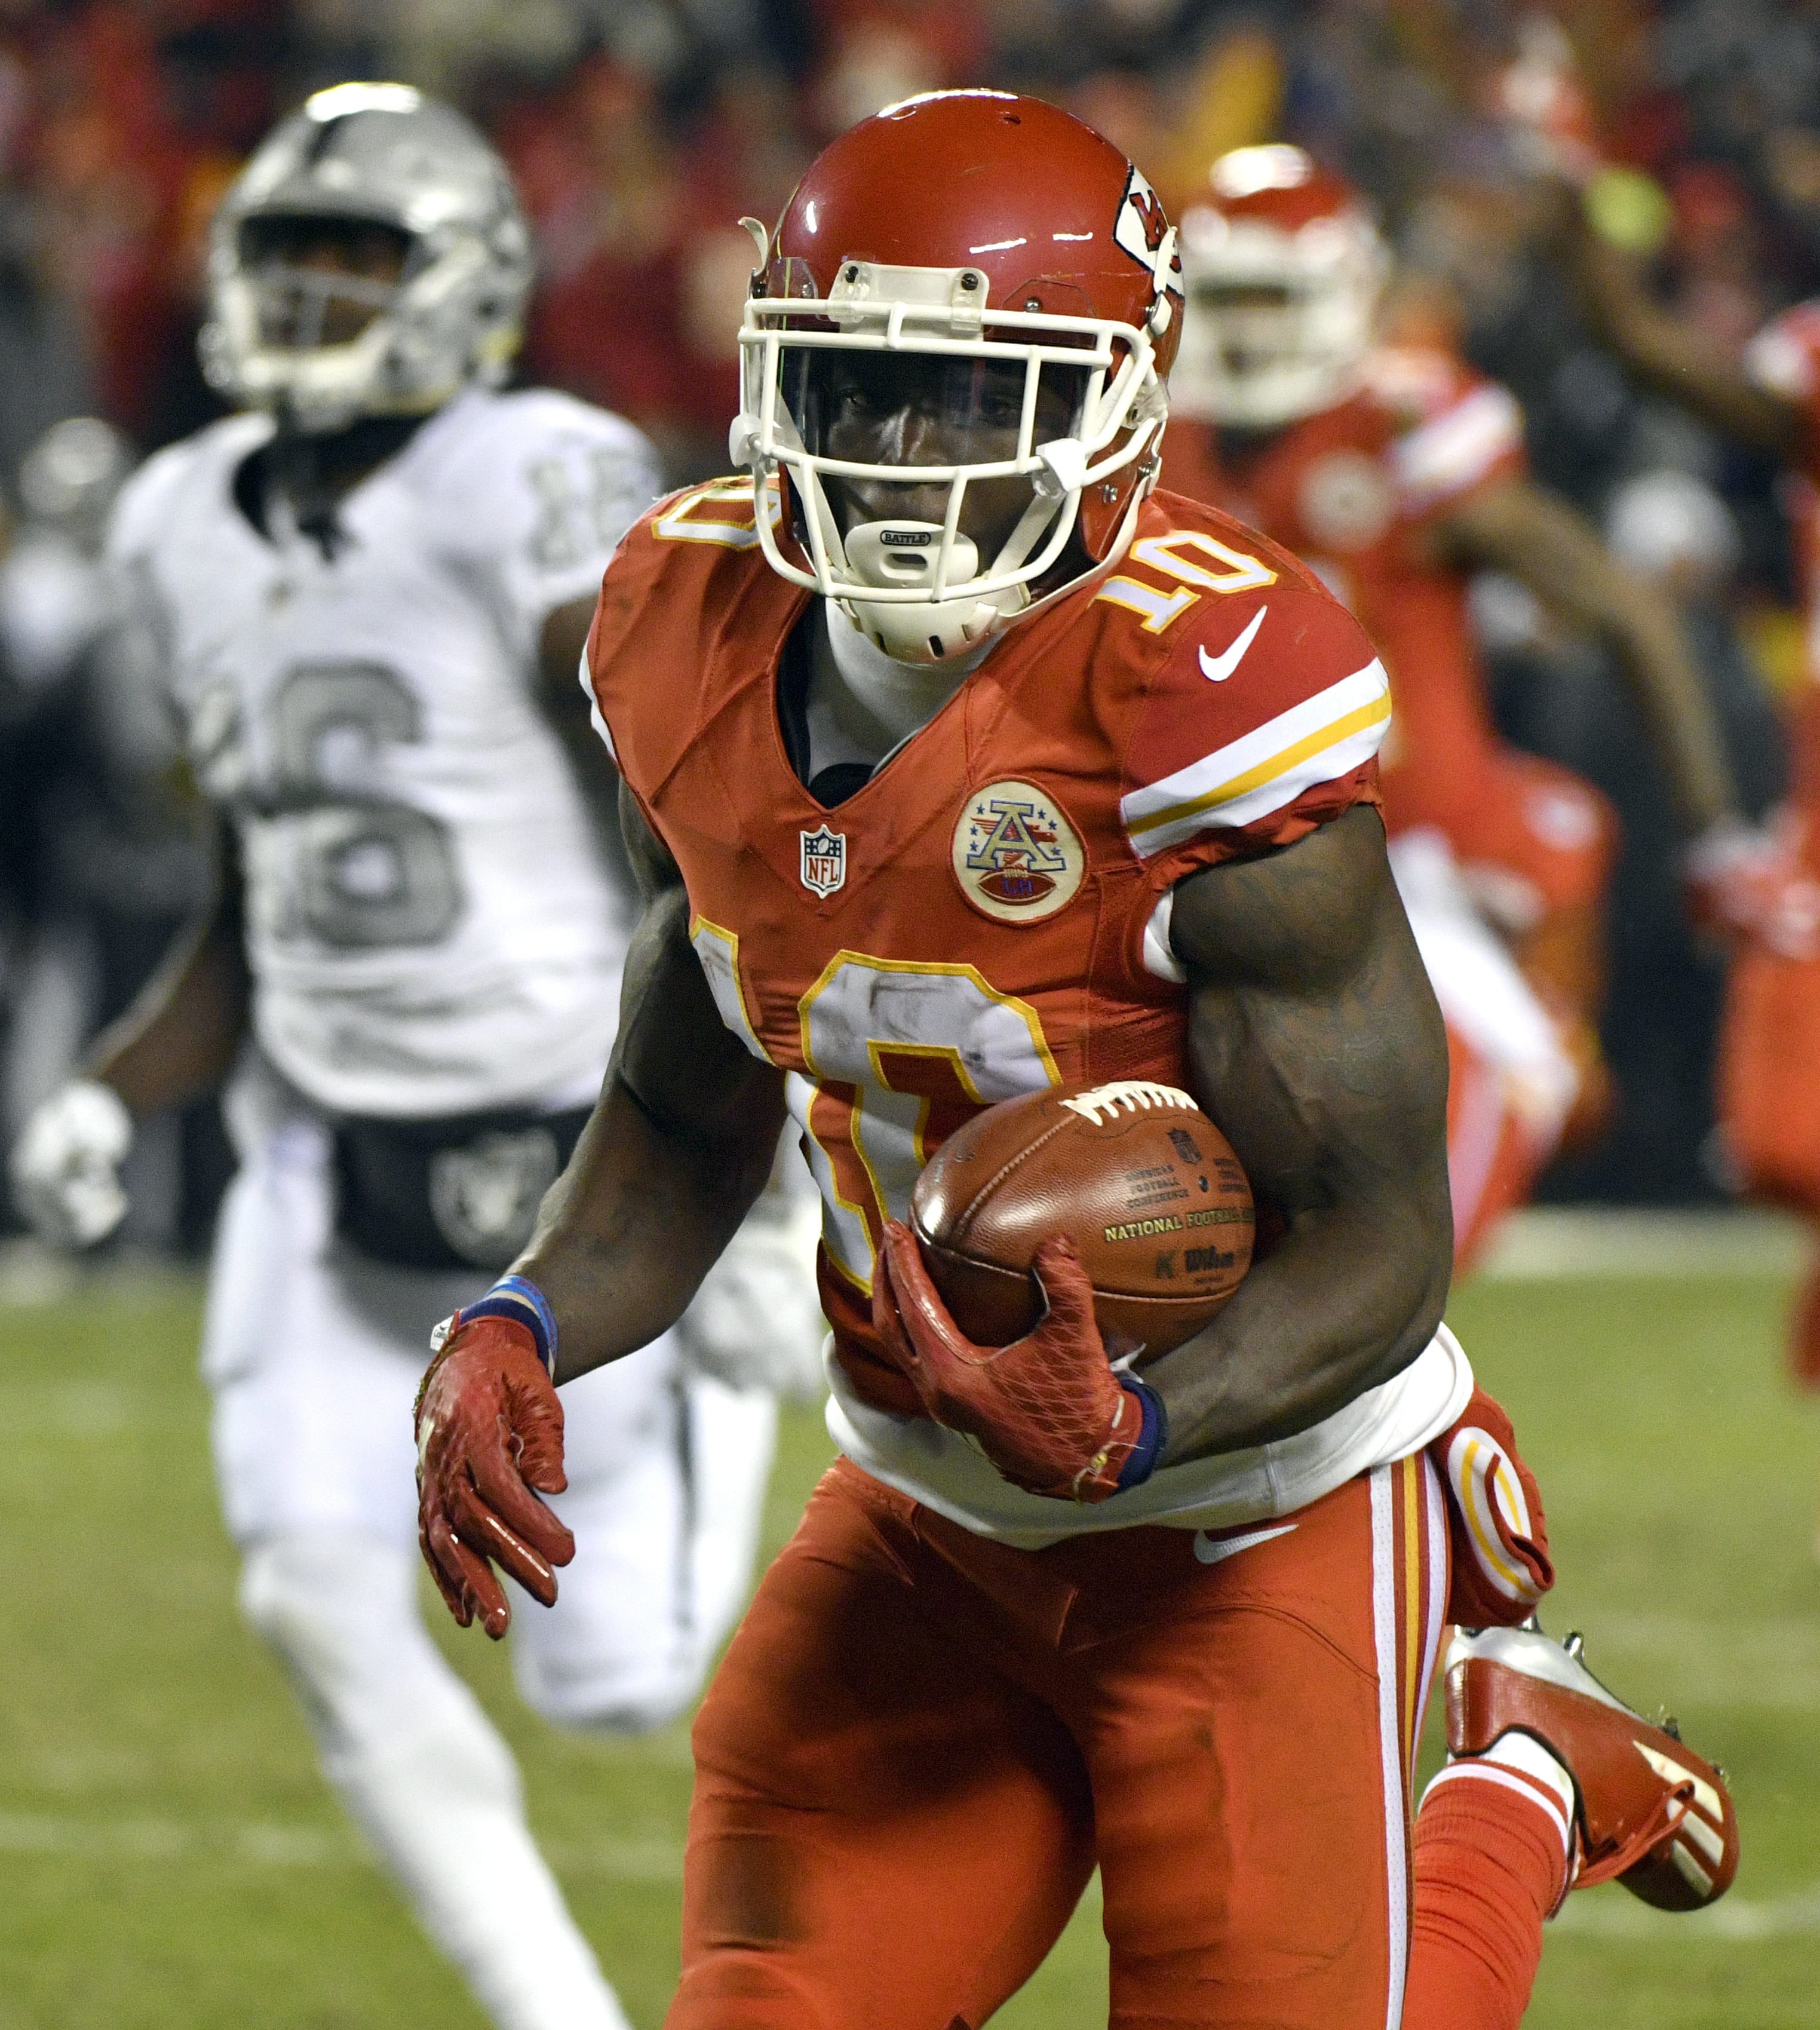 Kansas City Chiefs wide receiver Tyreek Hill (10) runs for a touchdown on a 78-yard kickoff return during the first half of an NFL football game against the Oakland Raiders in Kansas City, Mo., Thursday, Dec. 8, 2016.